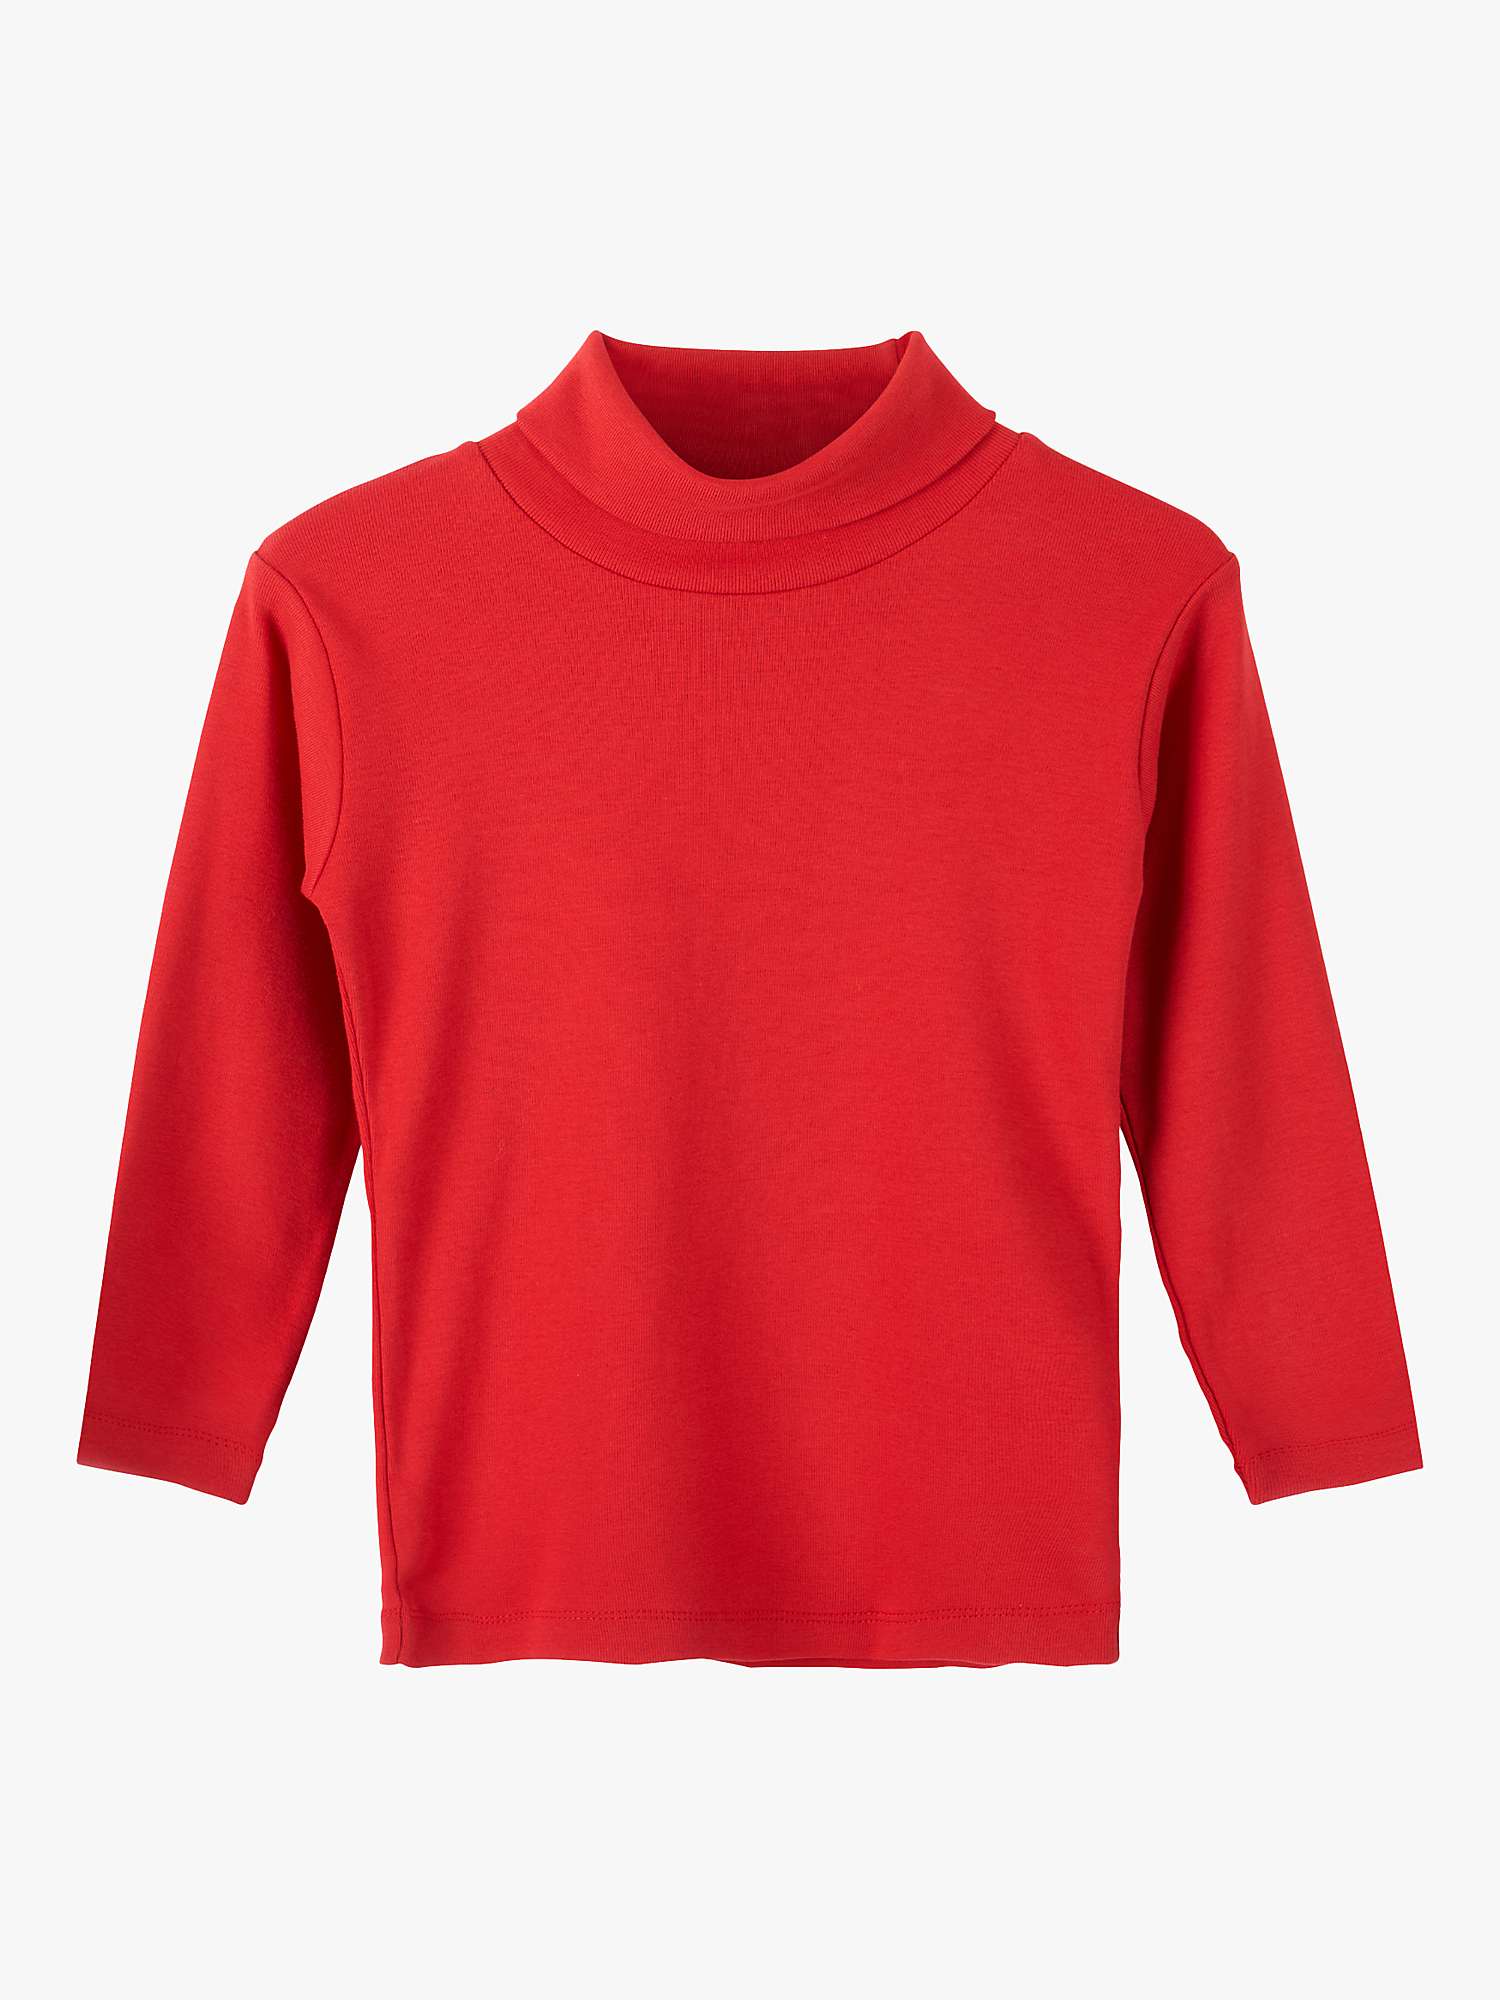 Buy Trotters Classic Roll Neck Top Online at johnlewis.com